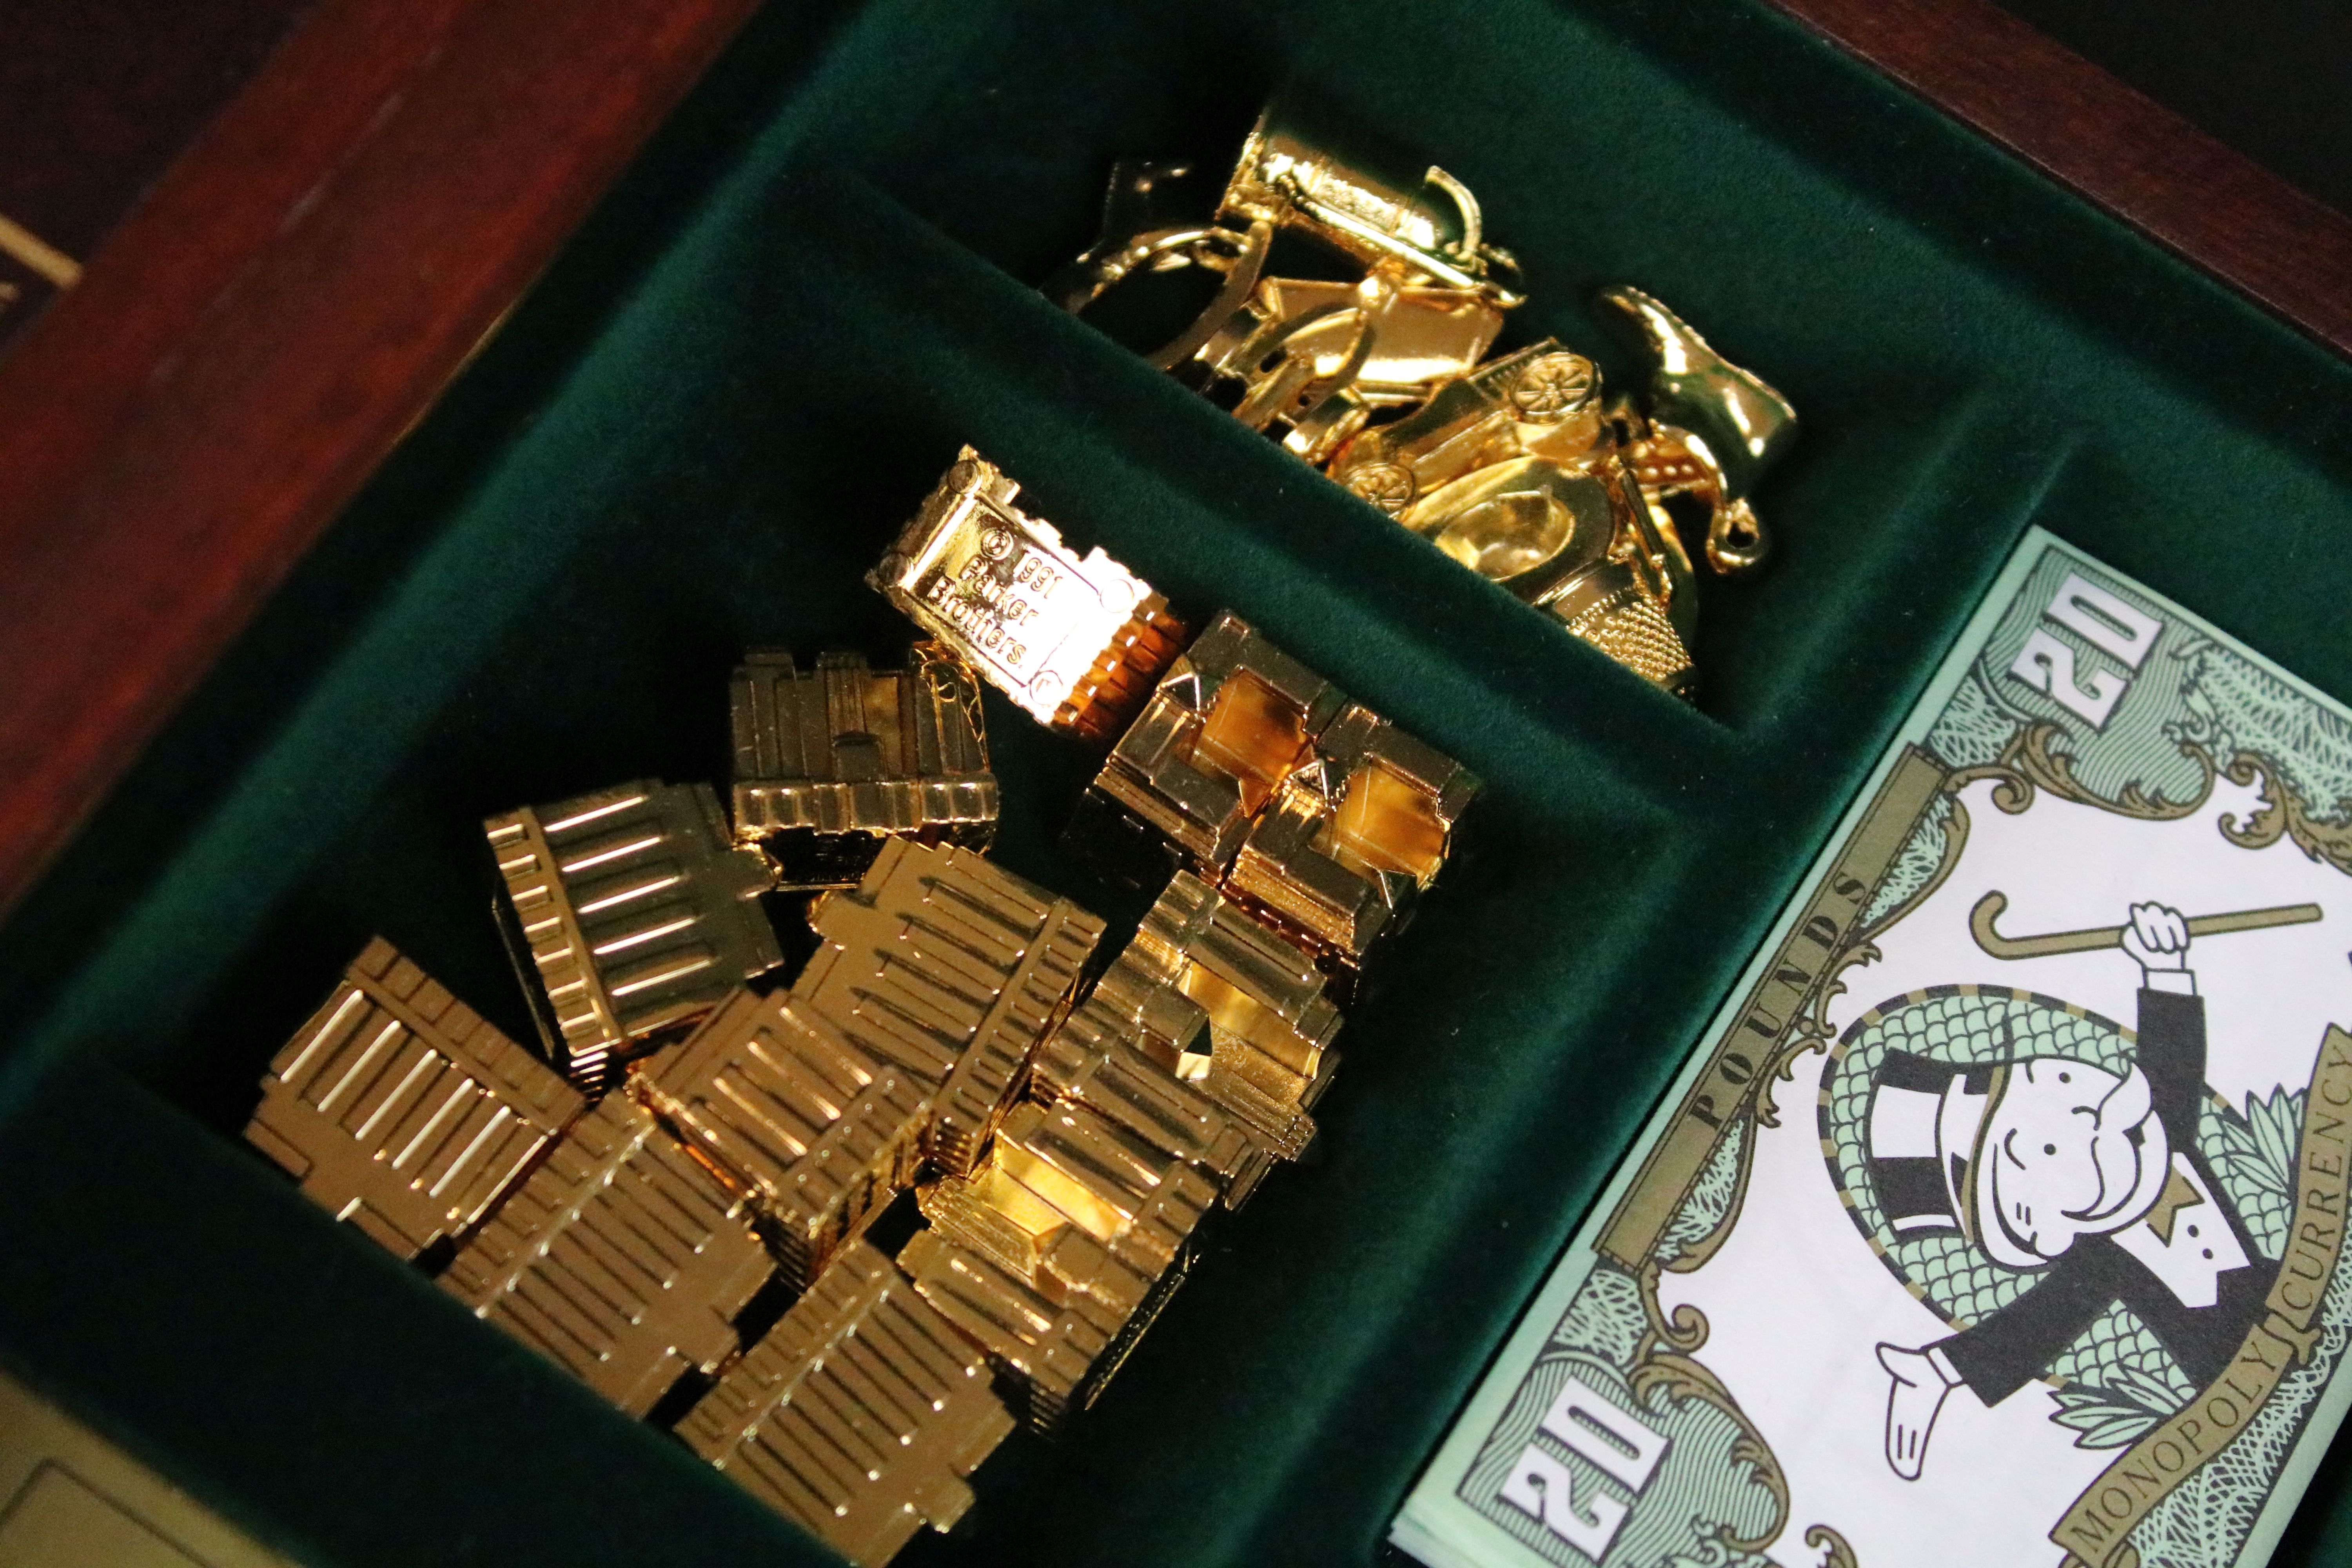 Franklin Mint Collectors Edition Monopoly Board Game with original 22ct gold plated game tokens, - Image 14 of 18